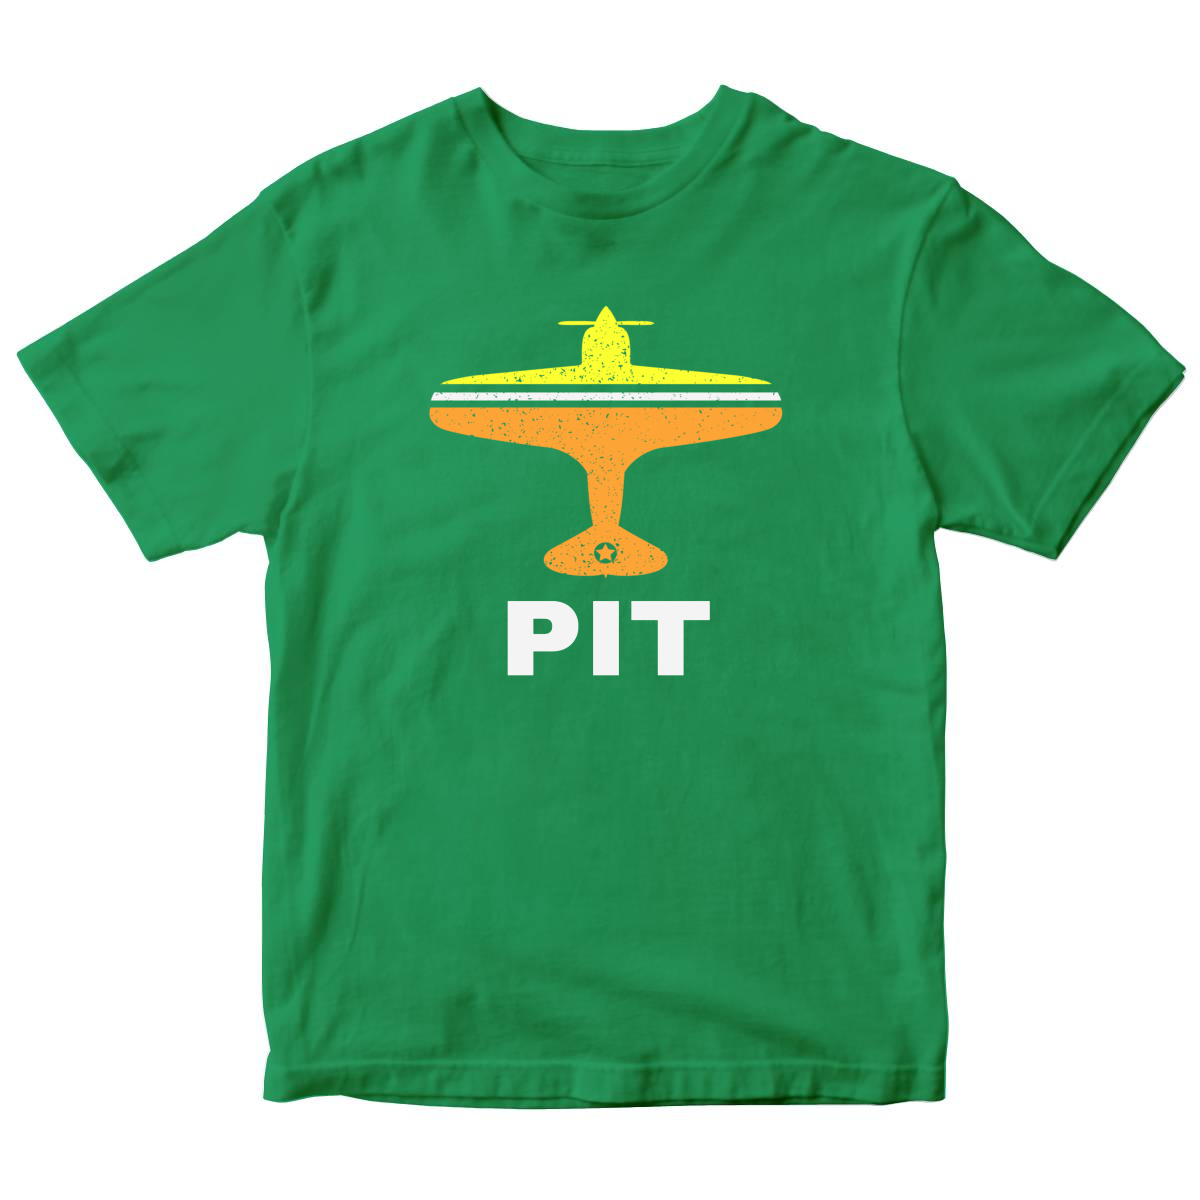 Fly Pittsburgh PIT Airport Kids T-shirt | Green